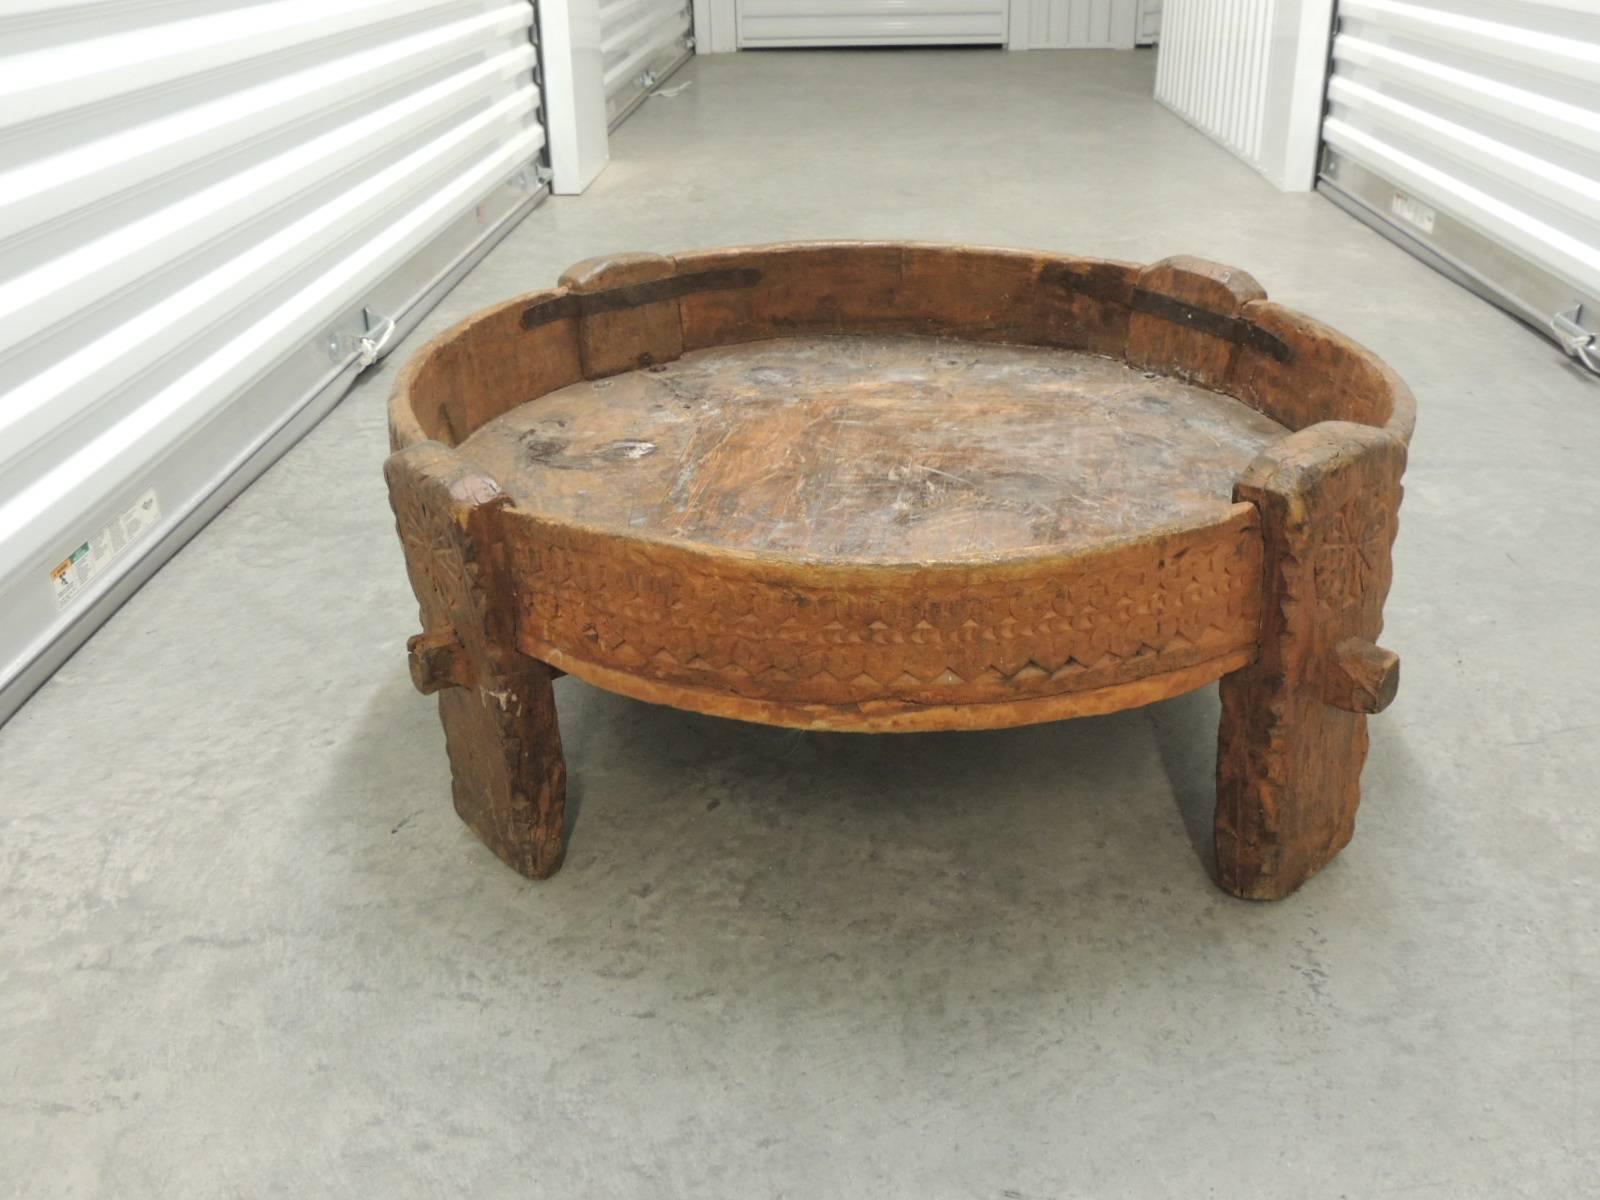 Offered by the Antique Textiles Galleries:
Moroccan carved wood Primitive vintage coffee table or ottoman.
Artisanal Moroccan carved wood Primitive coffee table. Handcrafted in the North of Africa with an inset. 
Size: 32 D x 11.5 H
Size of the